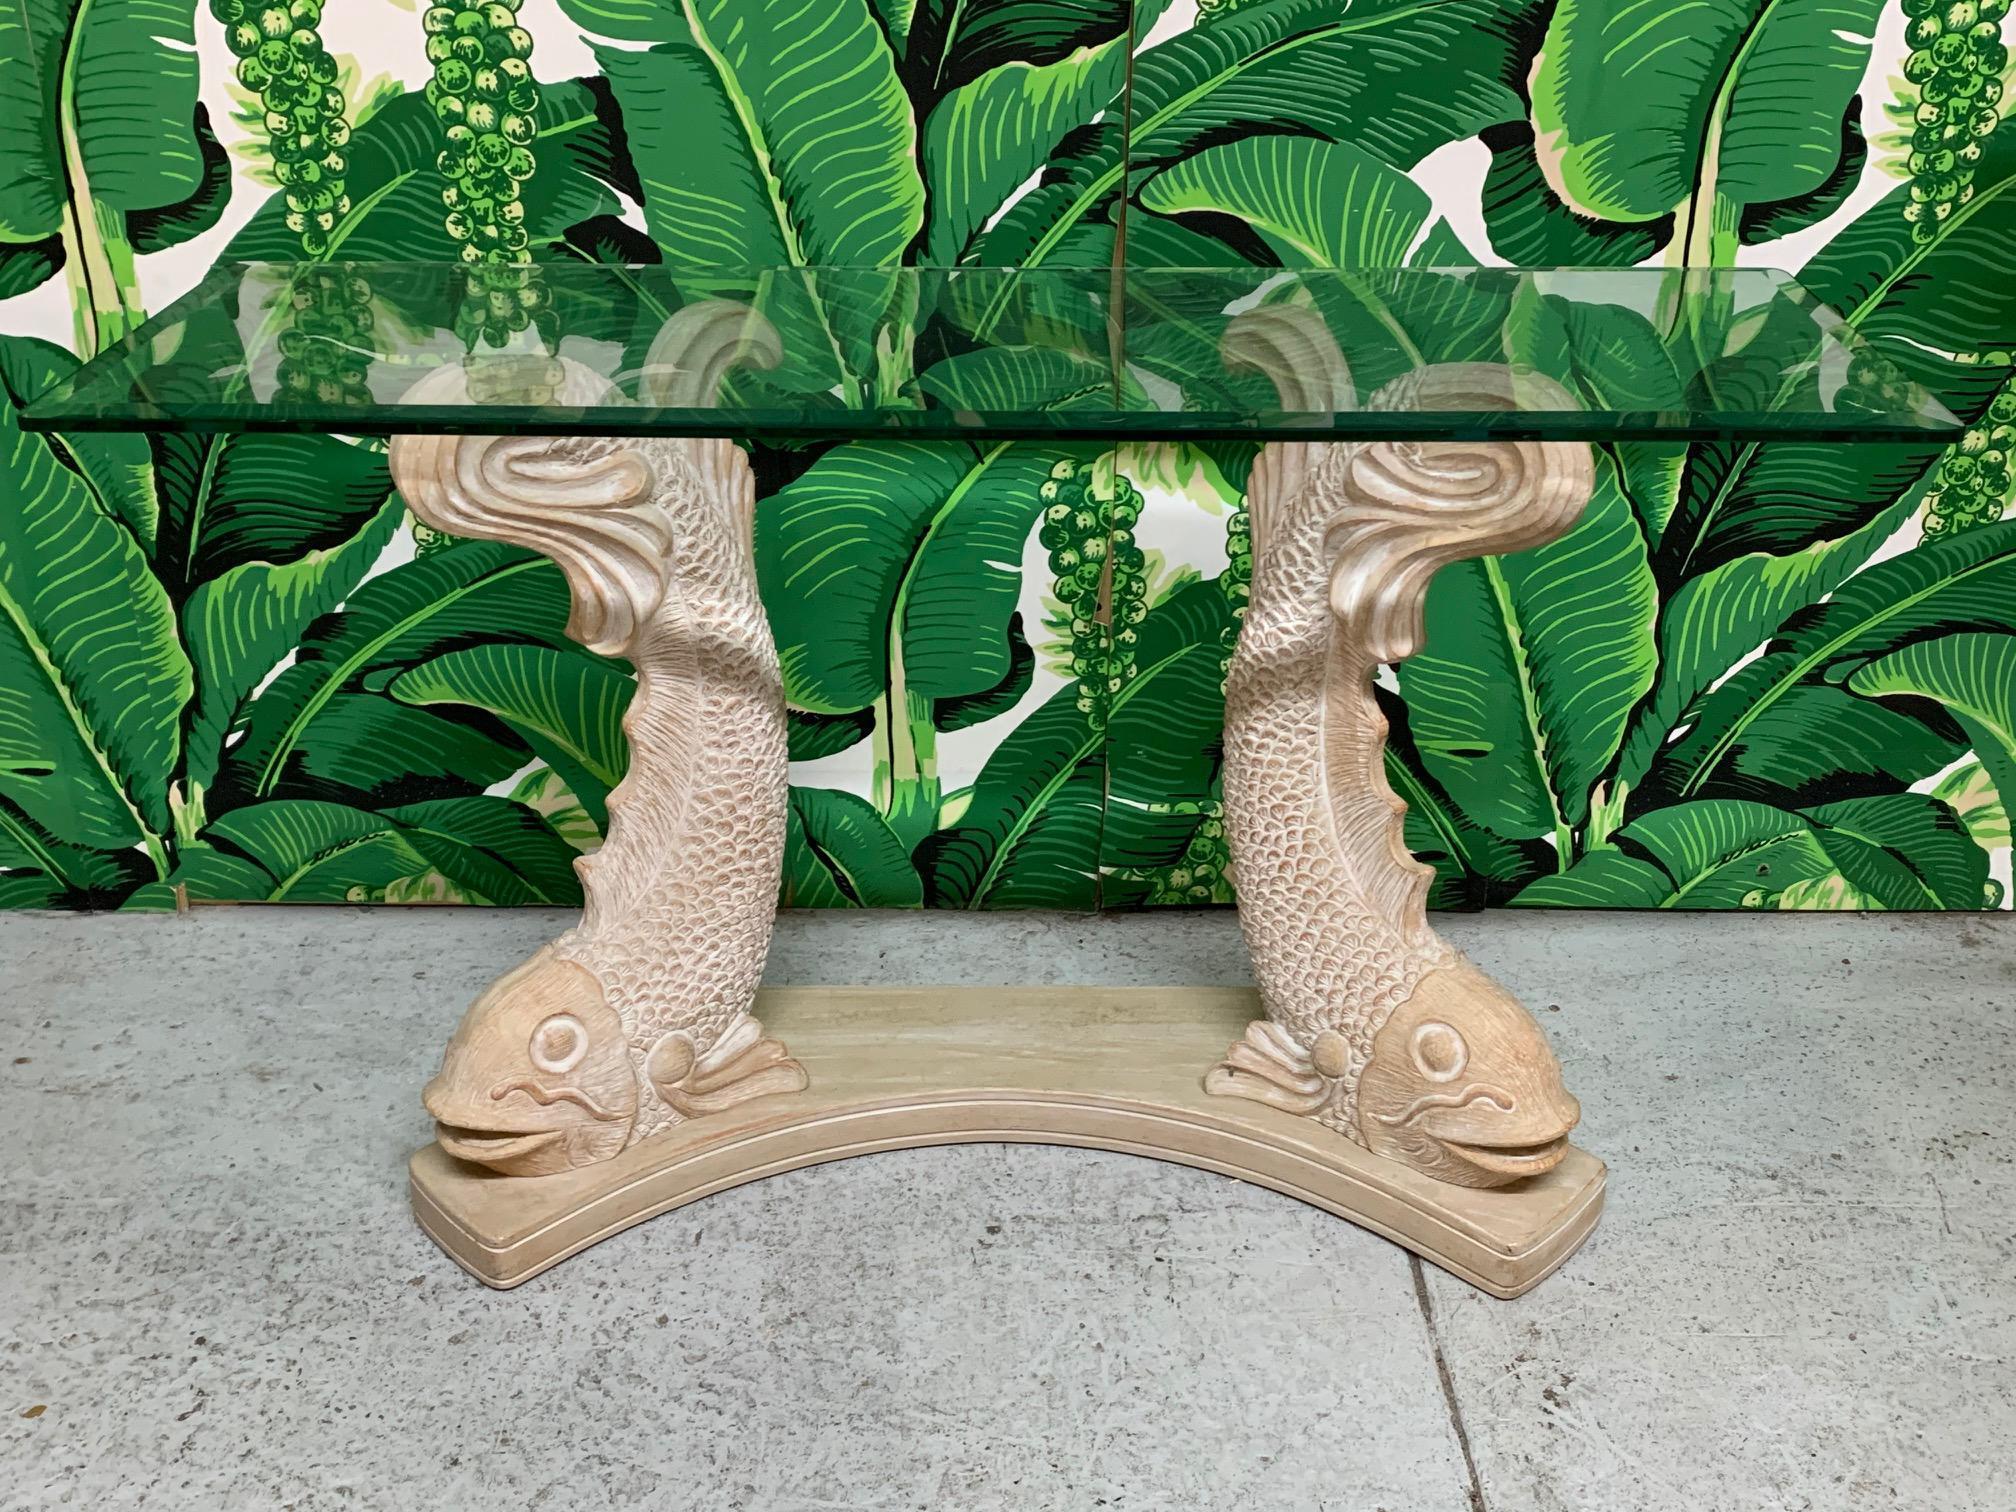 Sculptural console table in a Japanese Koi/Carp/Dolphin motif. Thick beveled glass top. Heavy cast resin construction. Good condition with minor imperfections consistent with age, see photos for condition details. We also have a version in white for